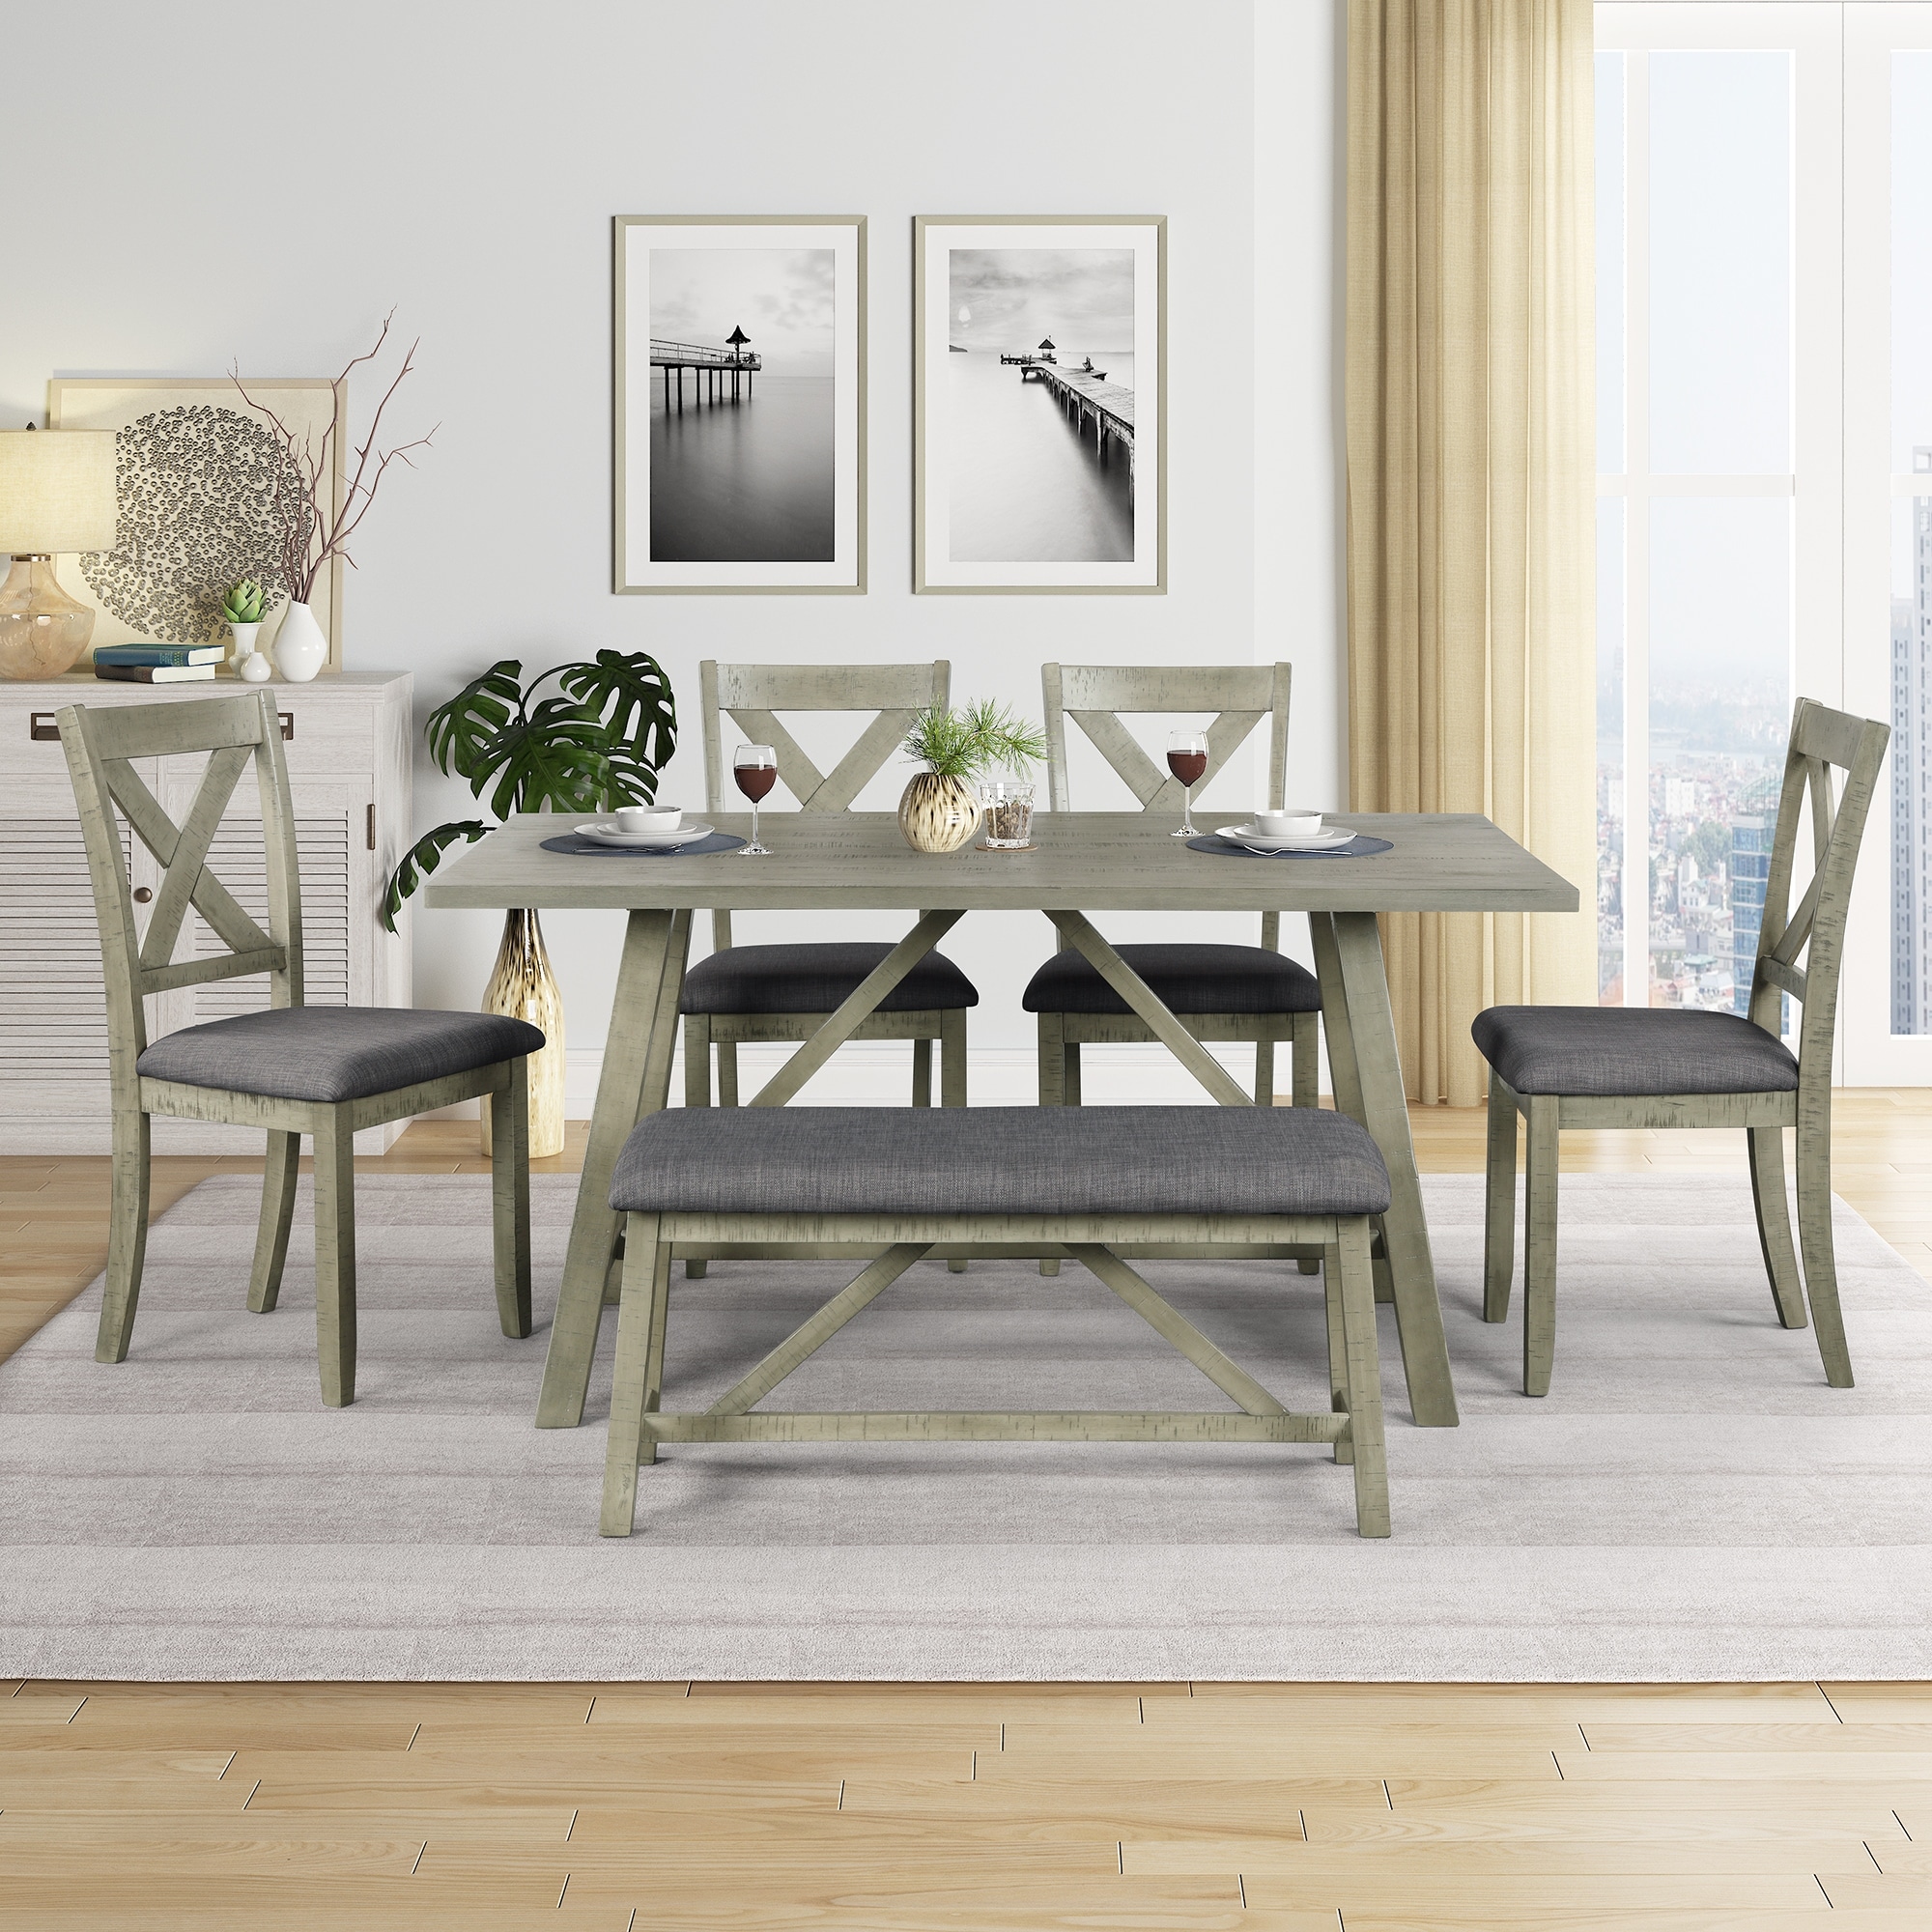 6 Piece Dining Table Set Wood Dining Table And Chair Kitchen Table Set